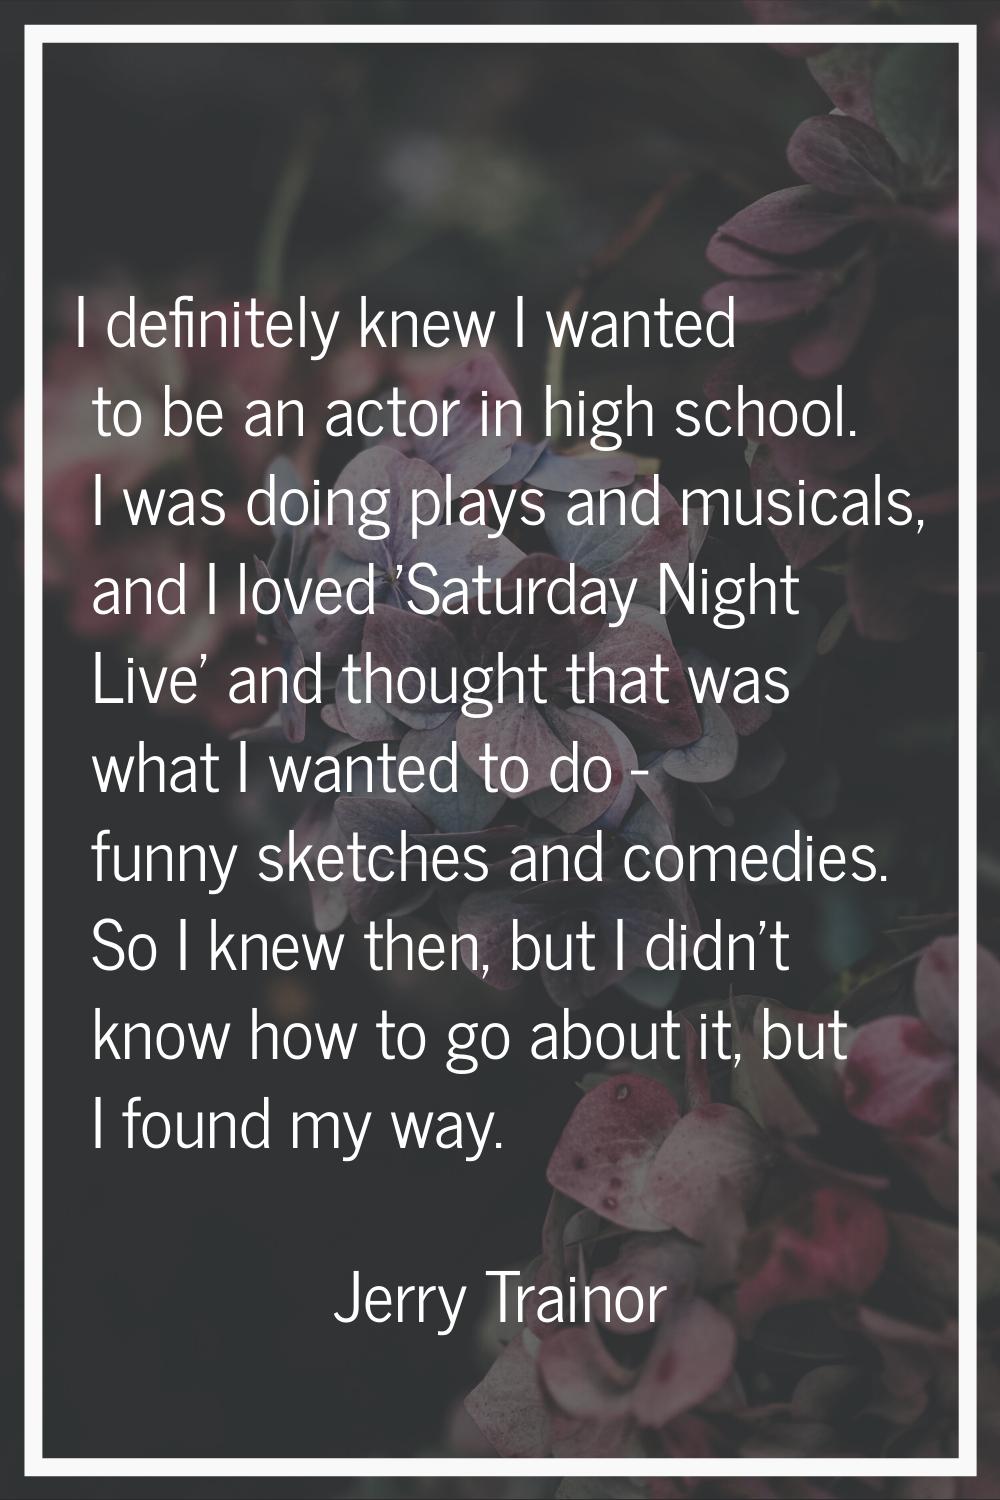 I definitely knew I wanted to be an actor in high school. I was doing plays and musicals, and I lov